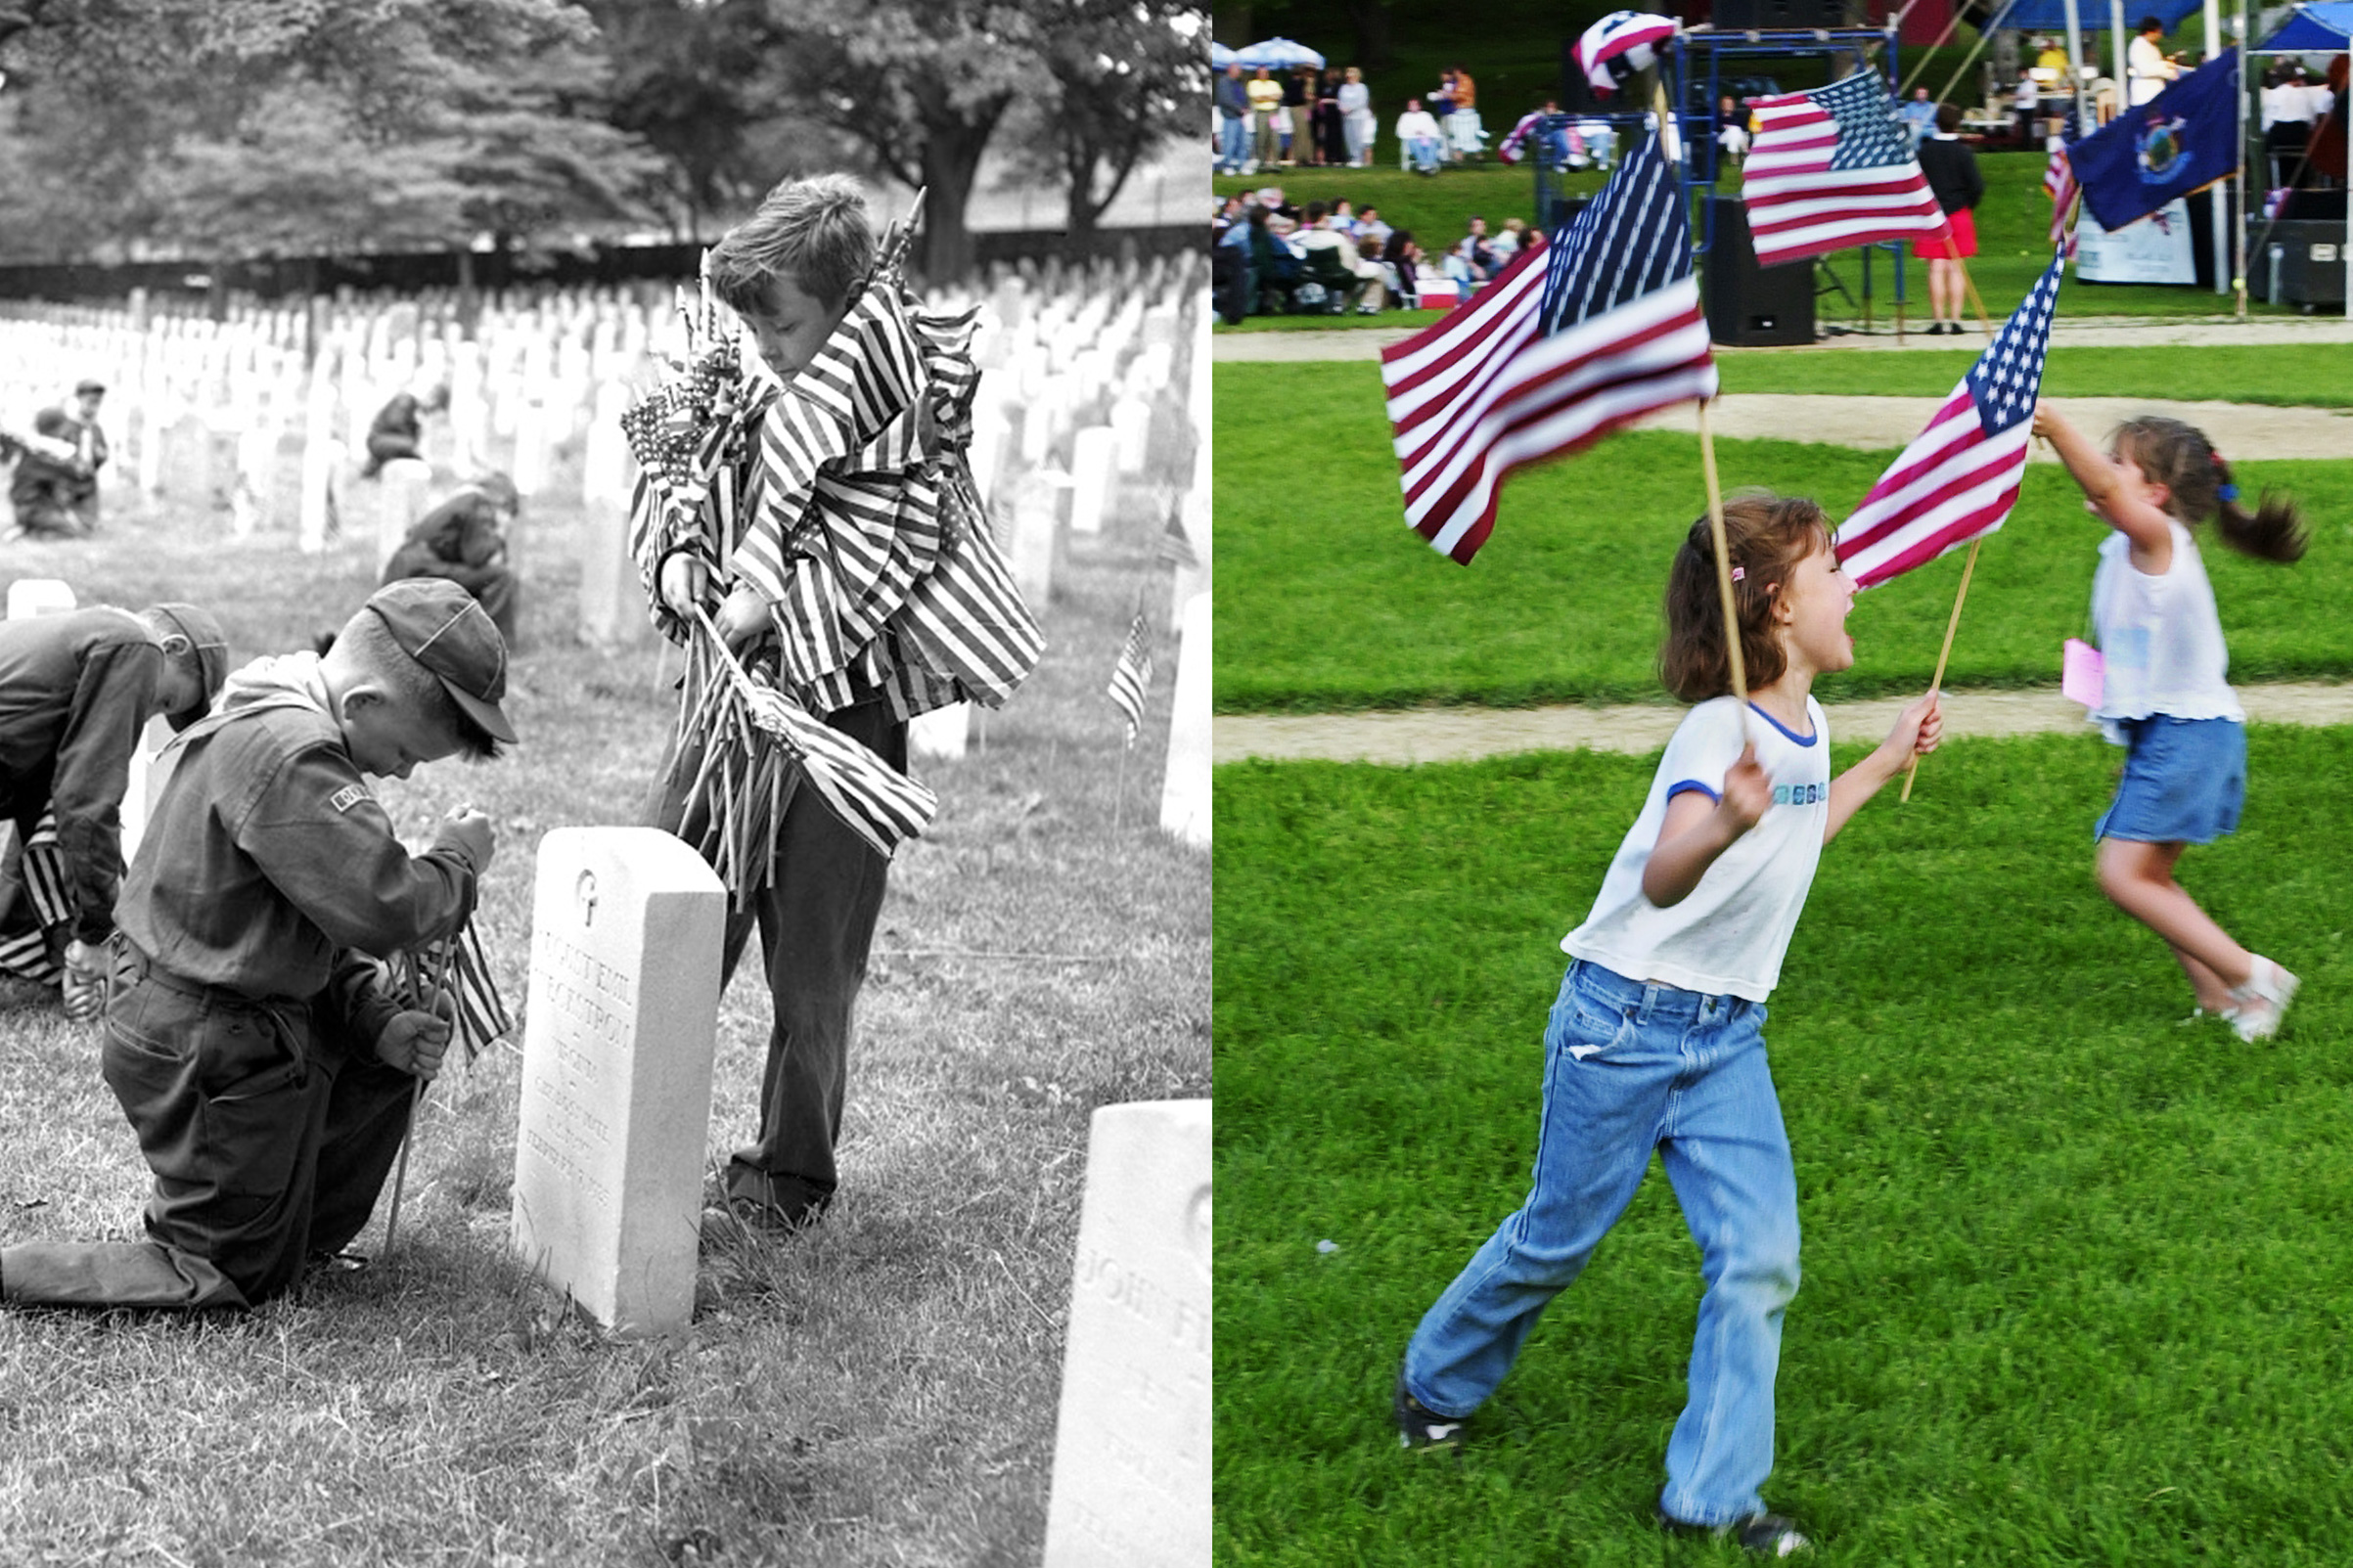 (L-R): Boy Scouts decorating graves for Memorial Day, 1955; Two young girls running around with American Flags from Memorial Day, 2001. (Ed Clarity/NY Daily News Archive via Getty Images; Gordon Chibroski/Portland Press Herald via Getty Images)